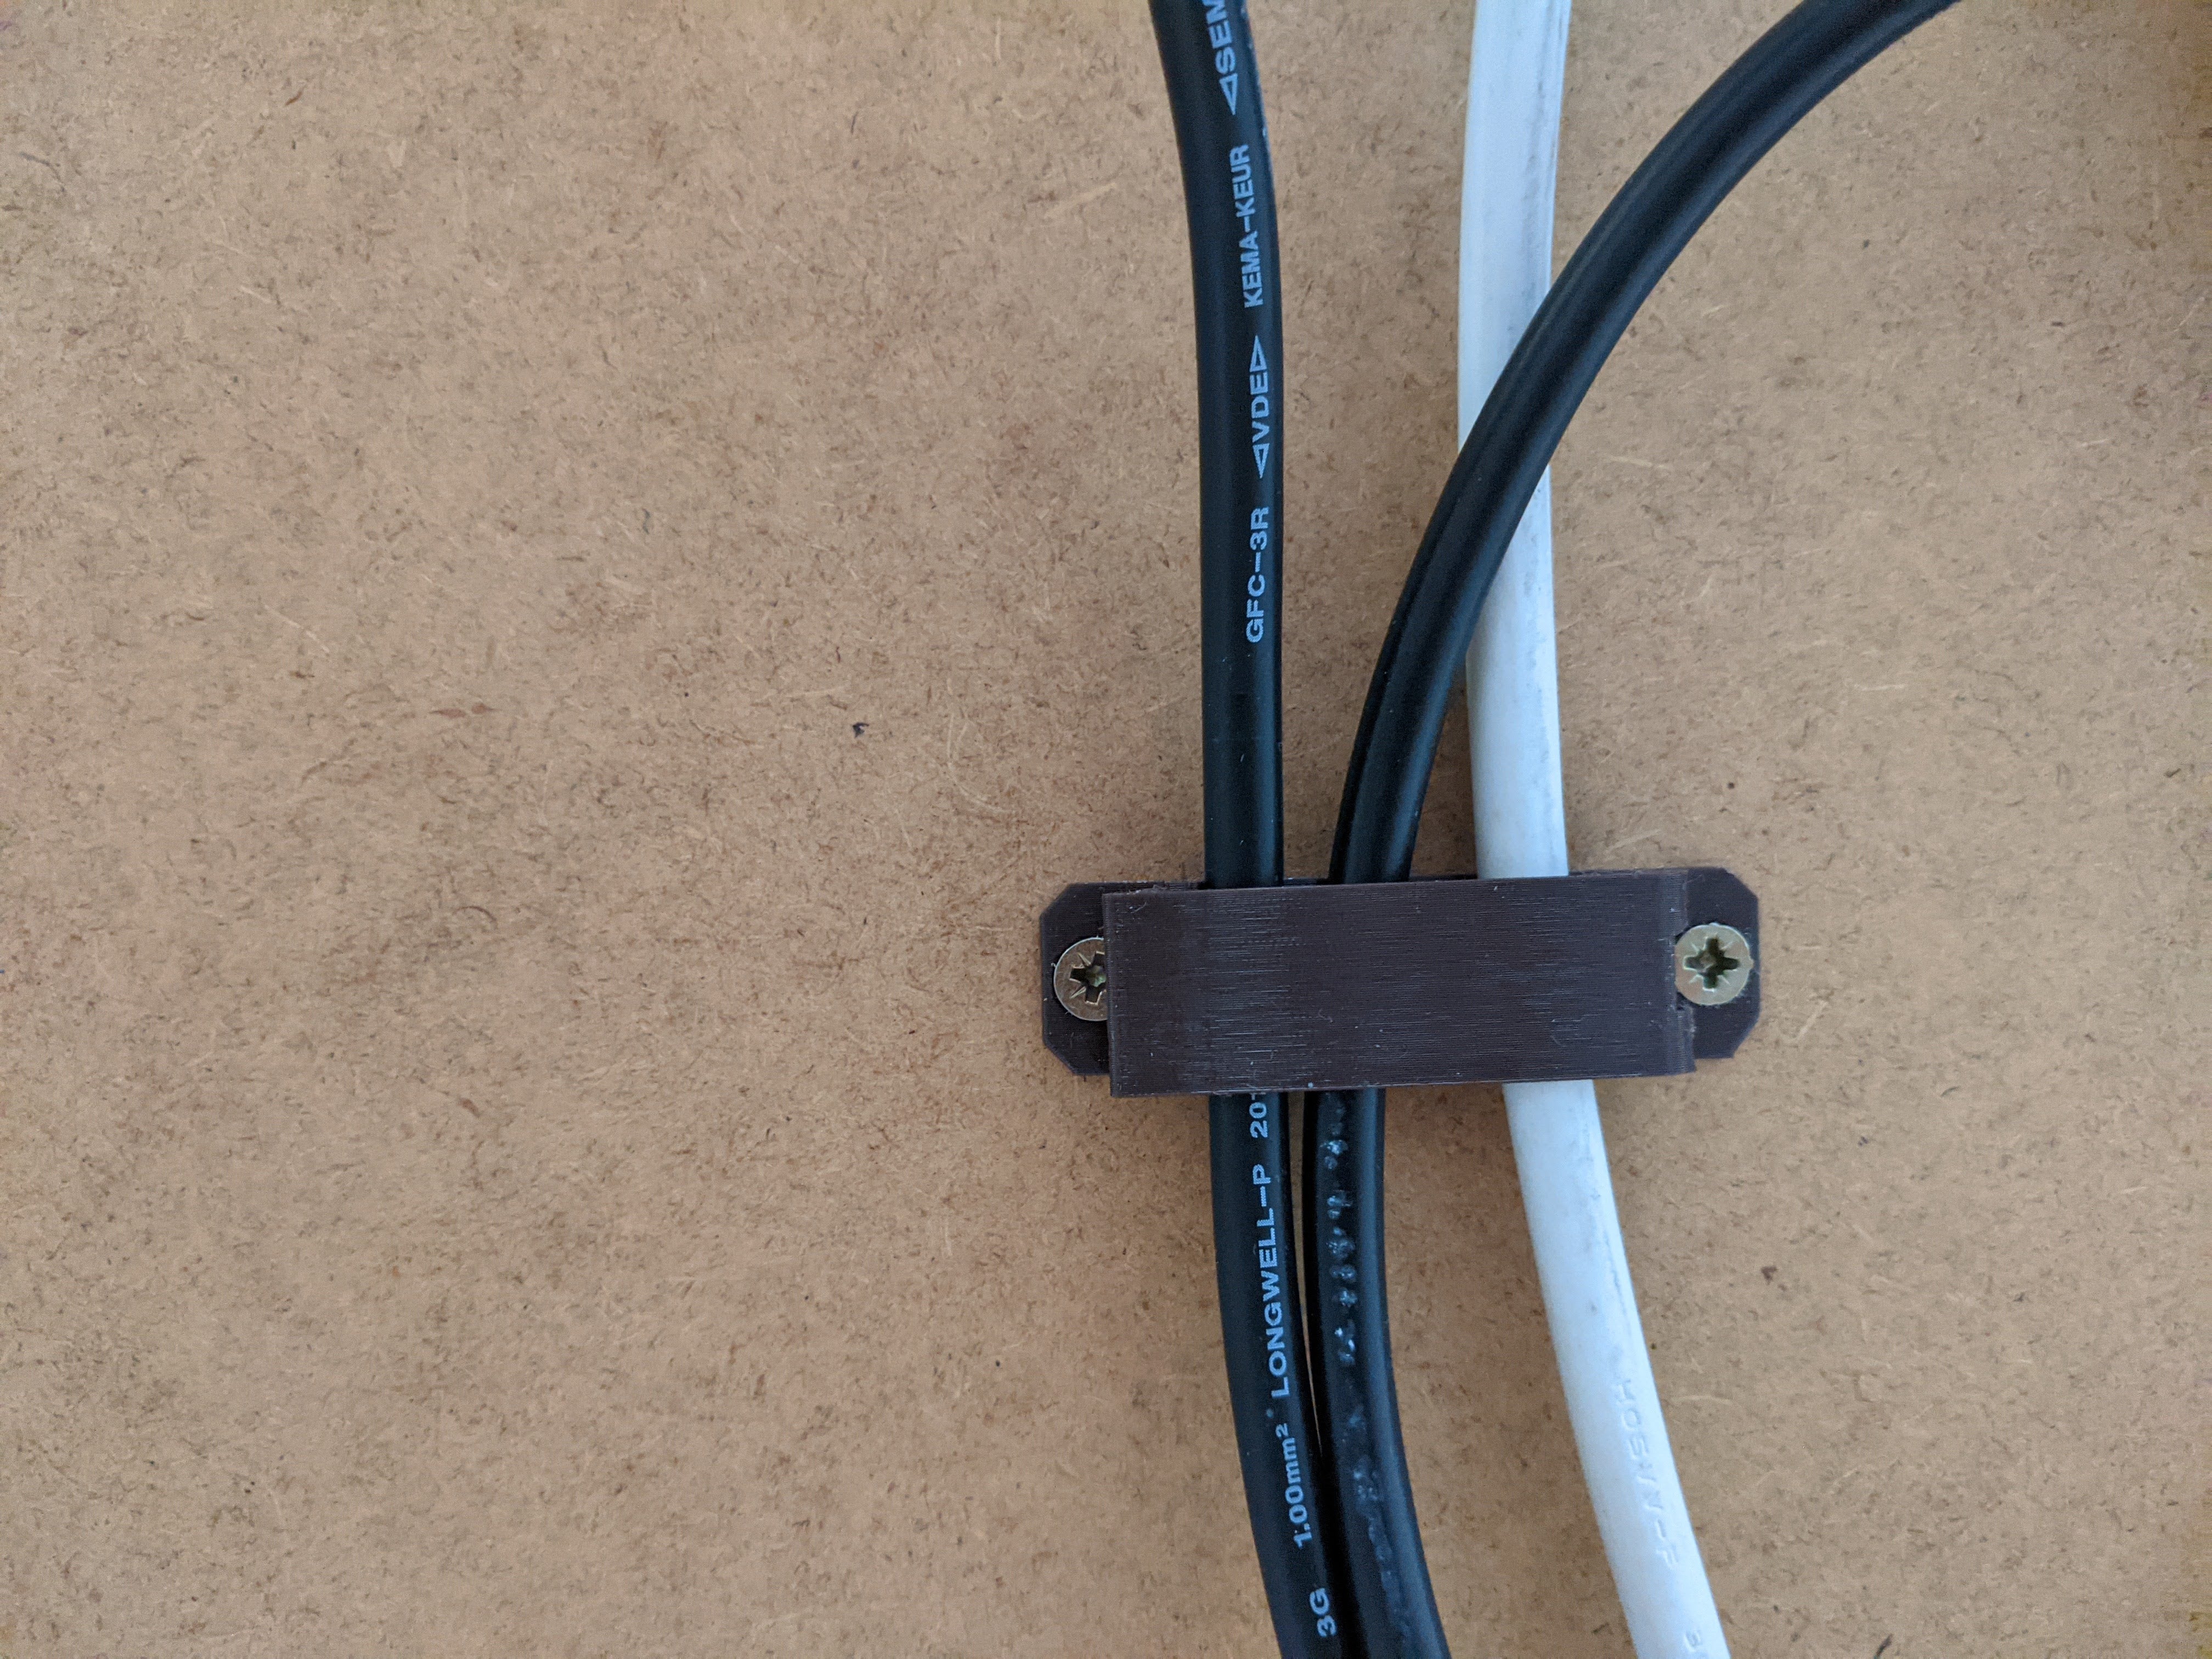 Cable management clip with hinge